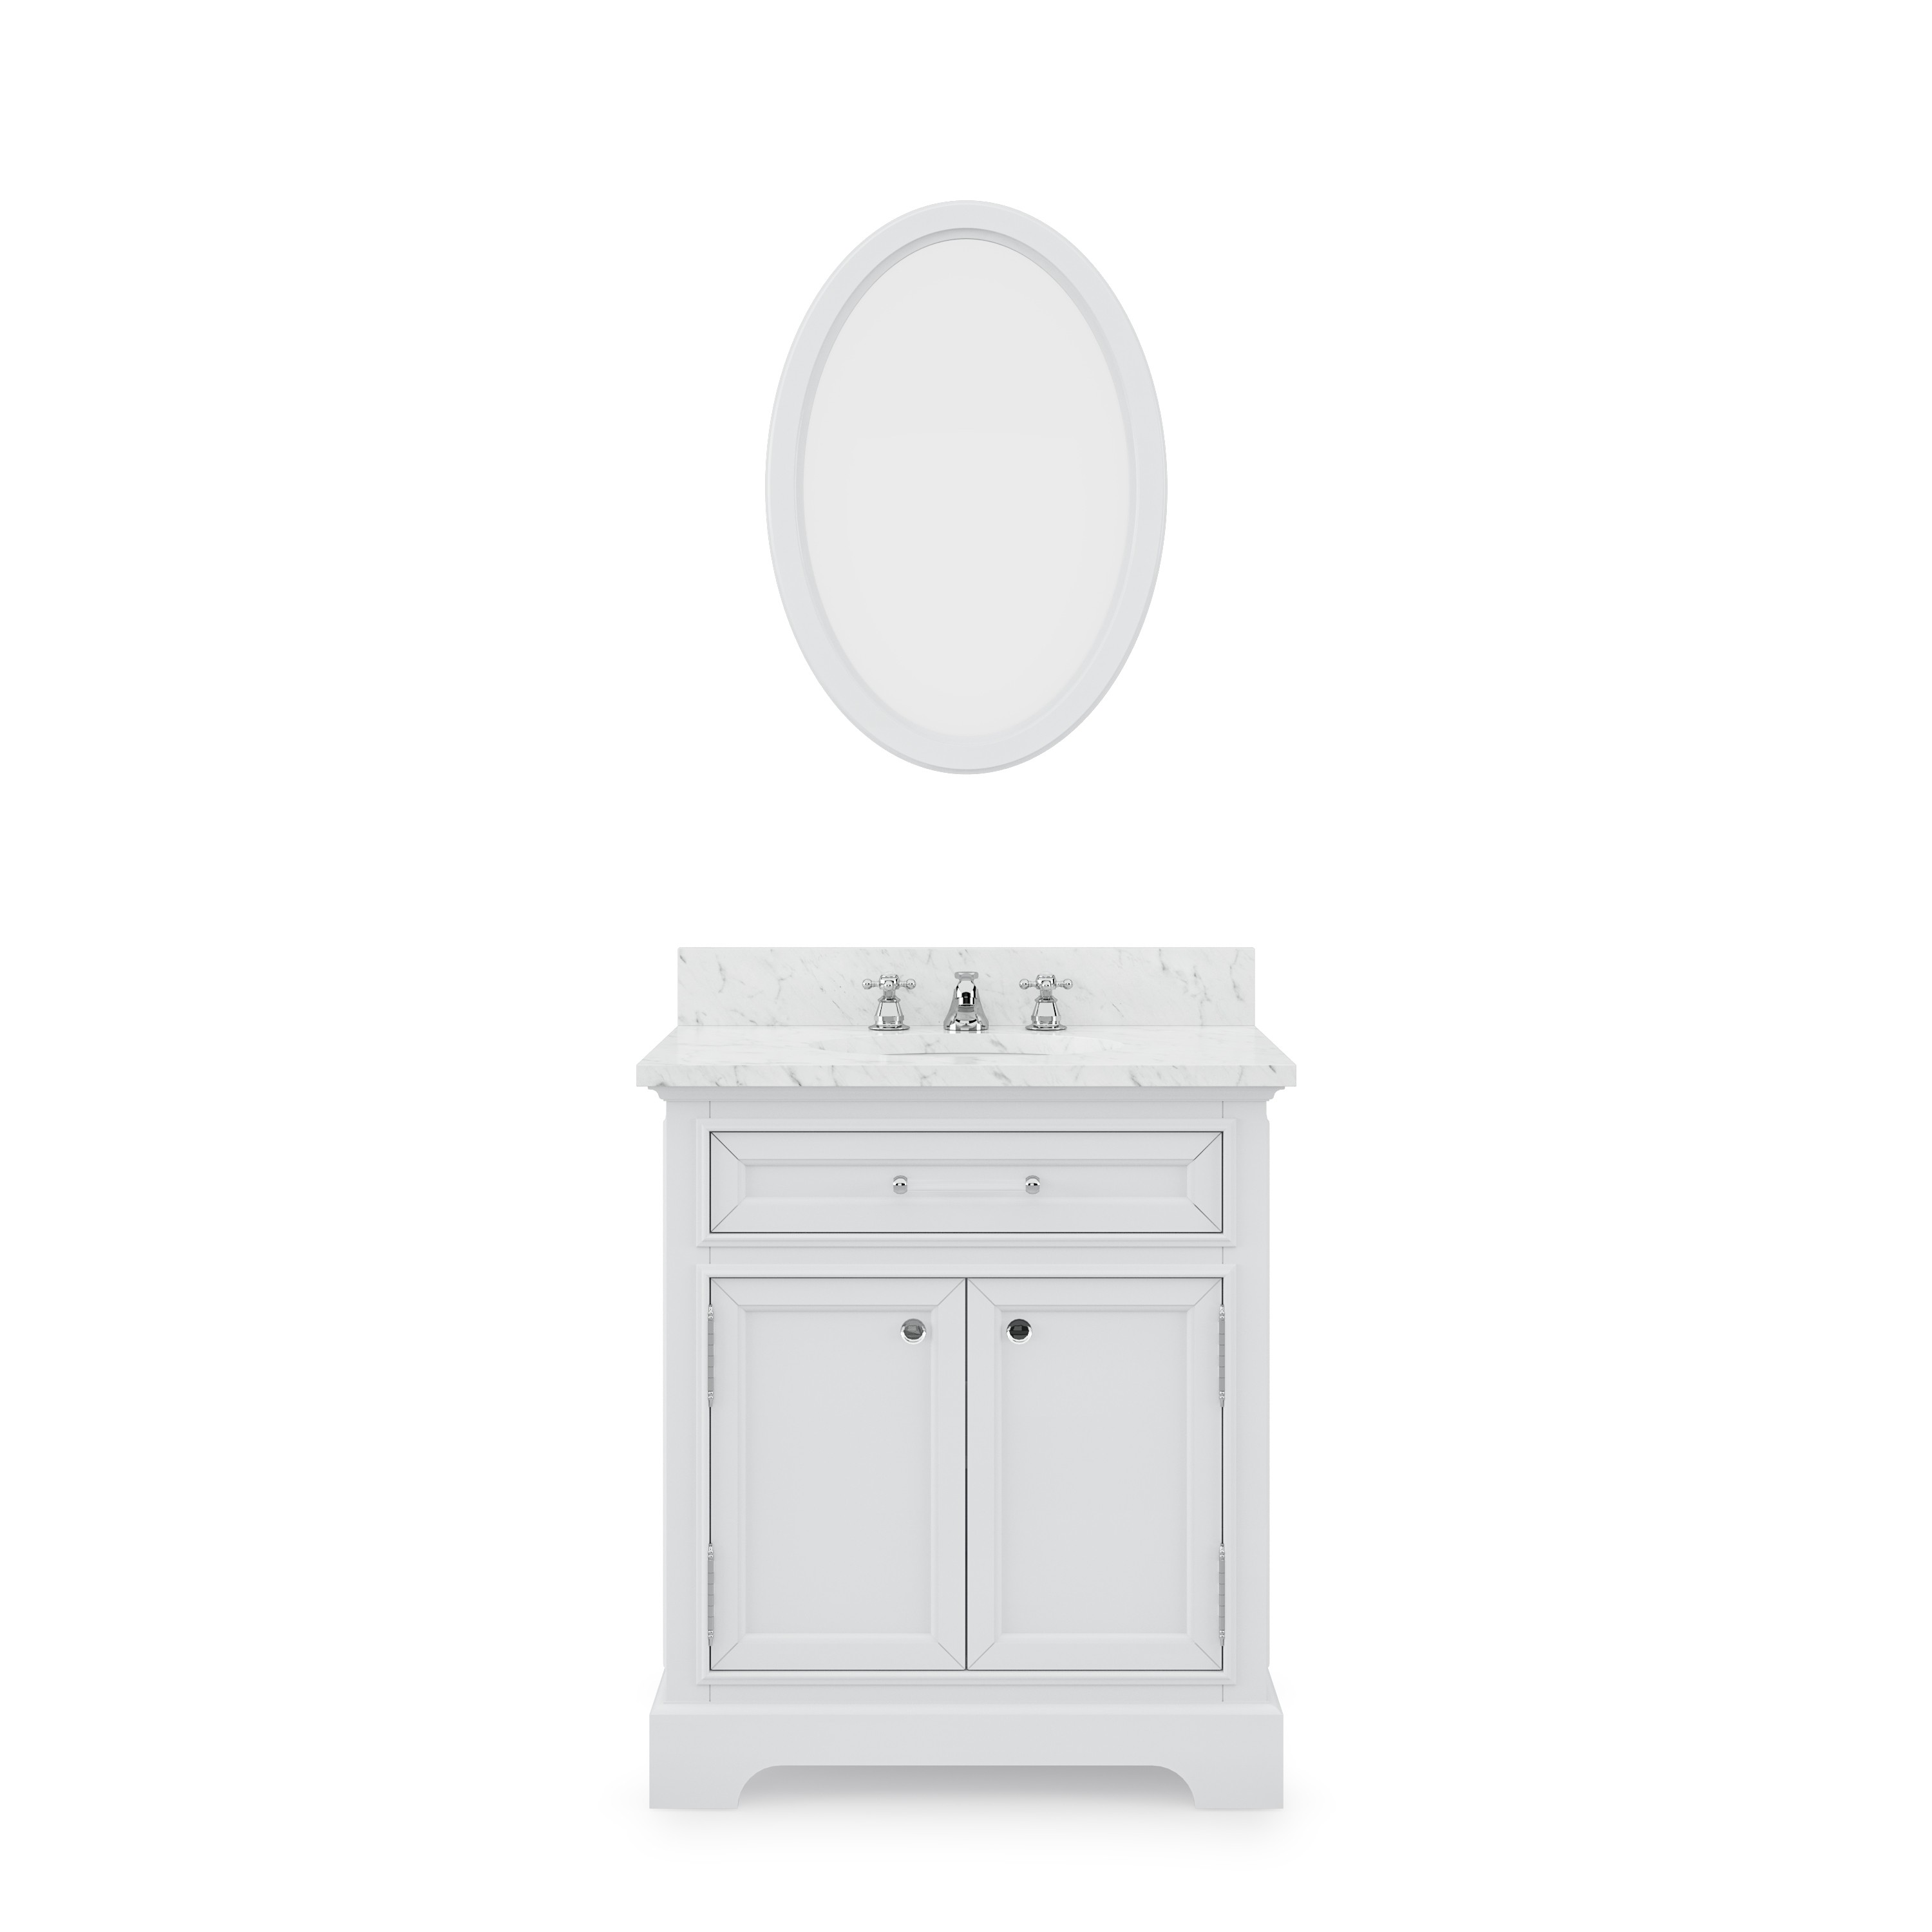 WATER-CREATION DE30CW01PW-O24000000 DERBY 30 INCH PURE WHITE SINGLE SINK BATHROOM VANITY WITH MATCHING FRAMED MIRROR